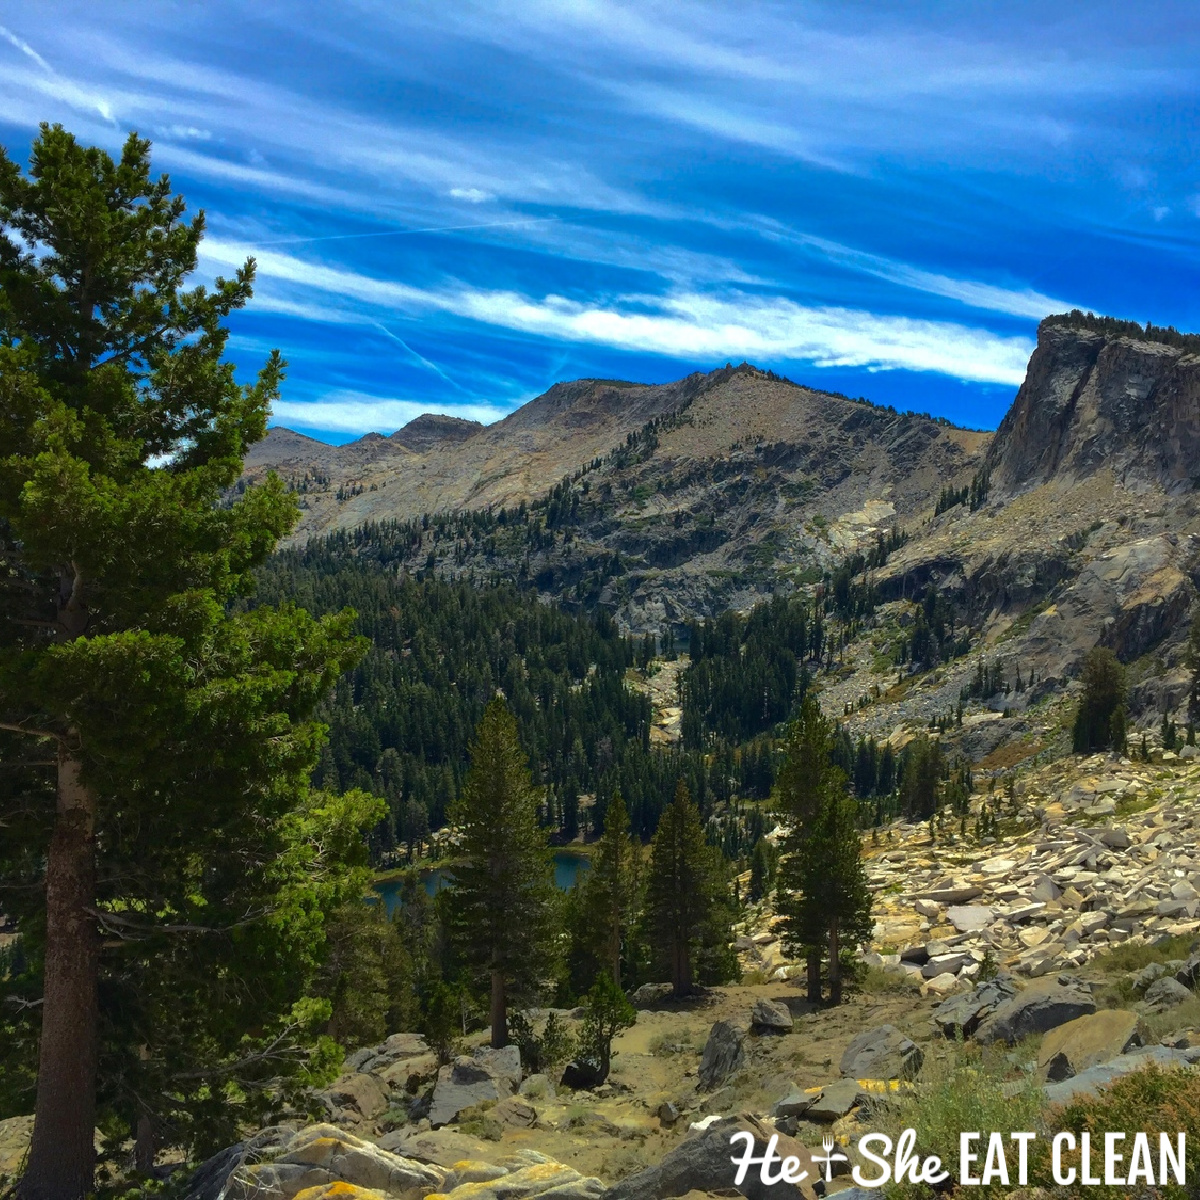 picture of mountains with trees and blue sky: Ten Lakes Basin in Yosemite National Park